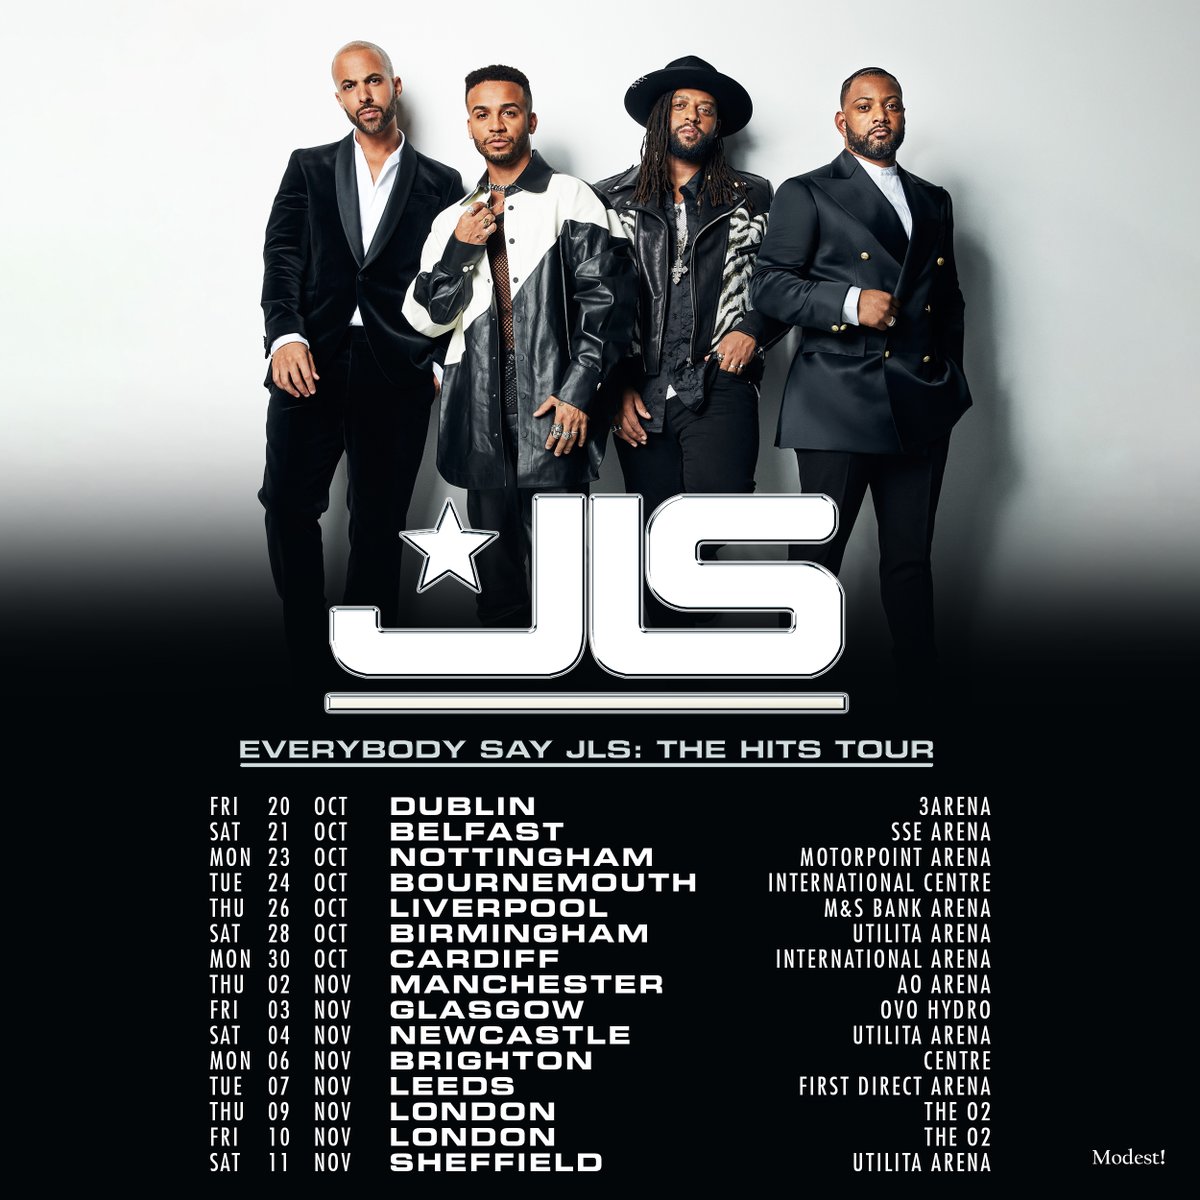 Jls Everybody Say Jls The Hits Tour at 3Arena Dublin Tickets (20